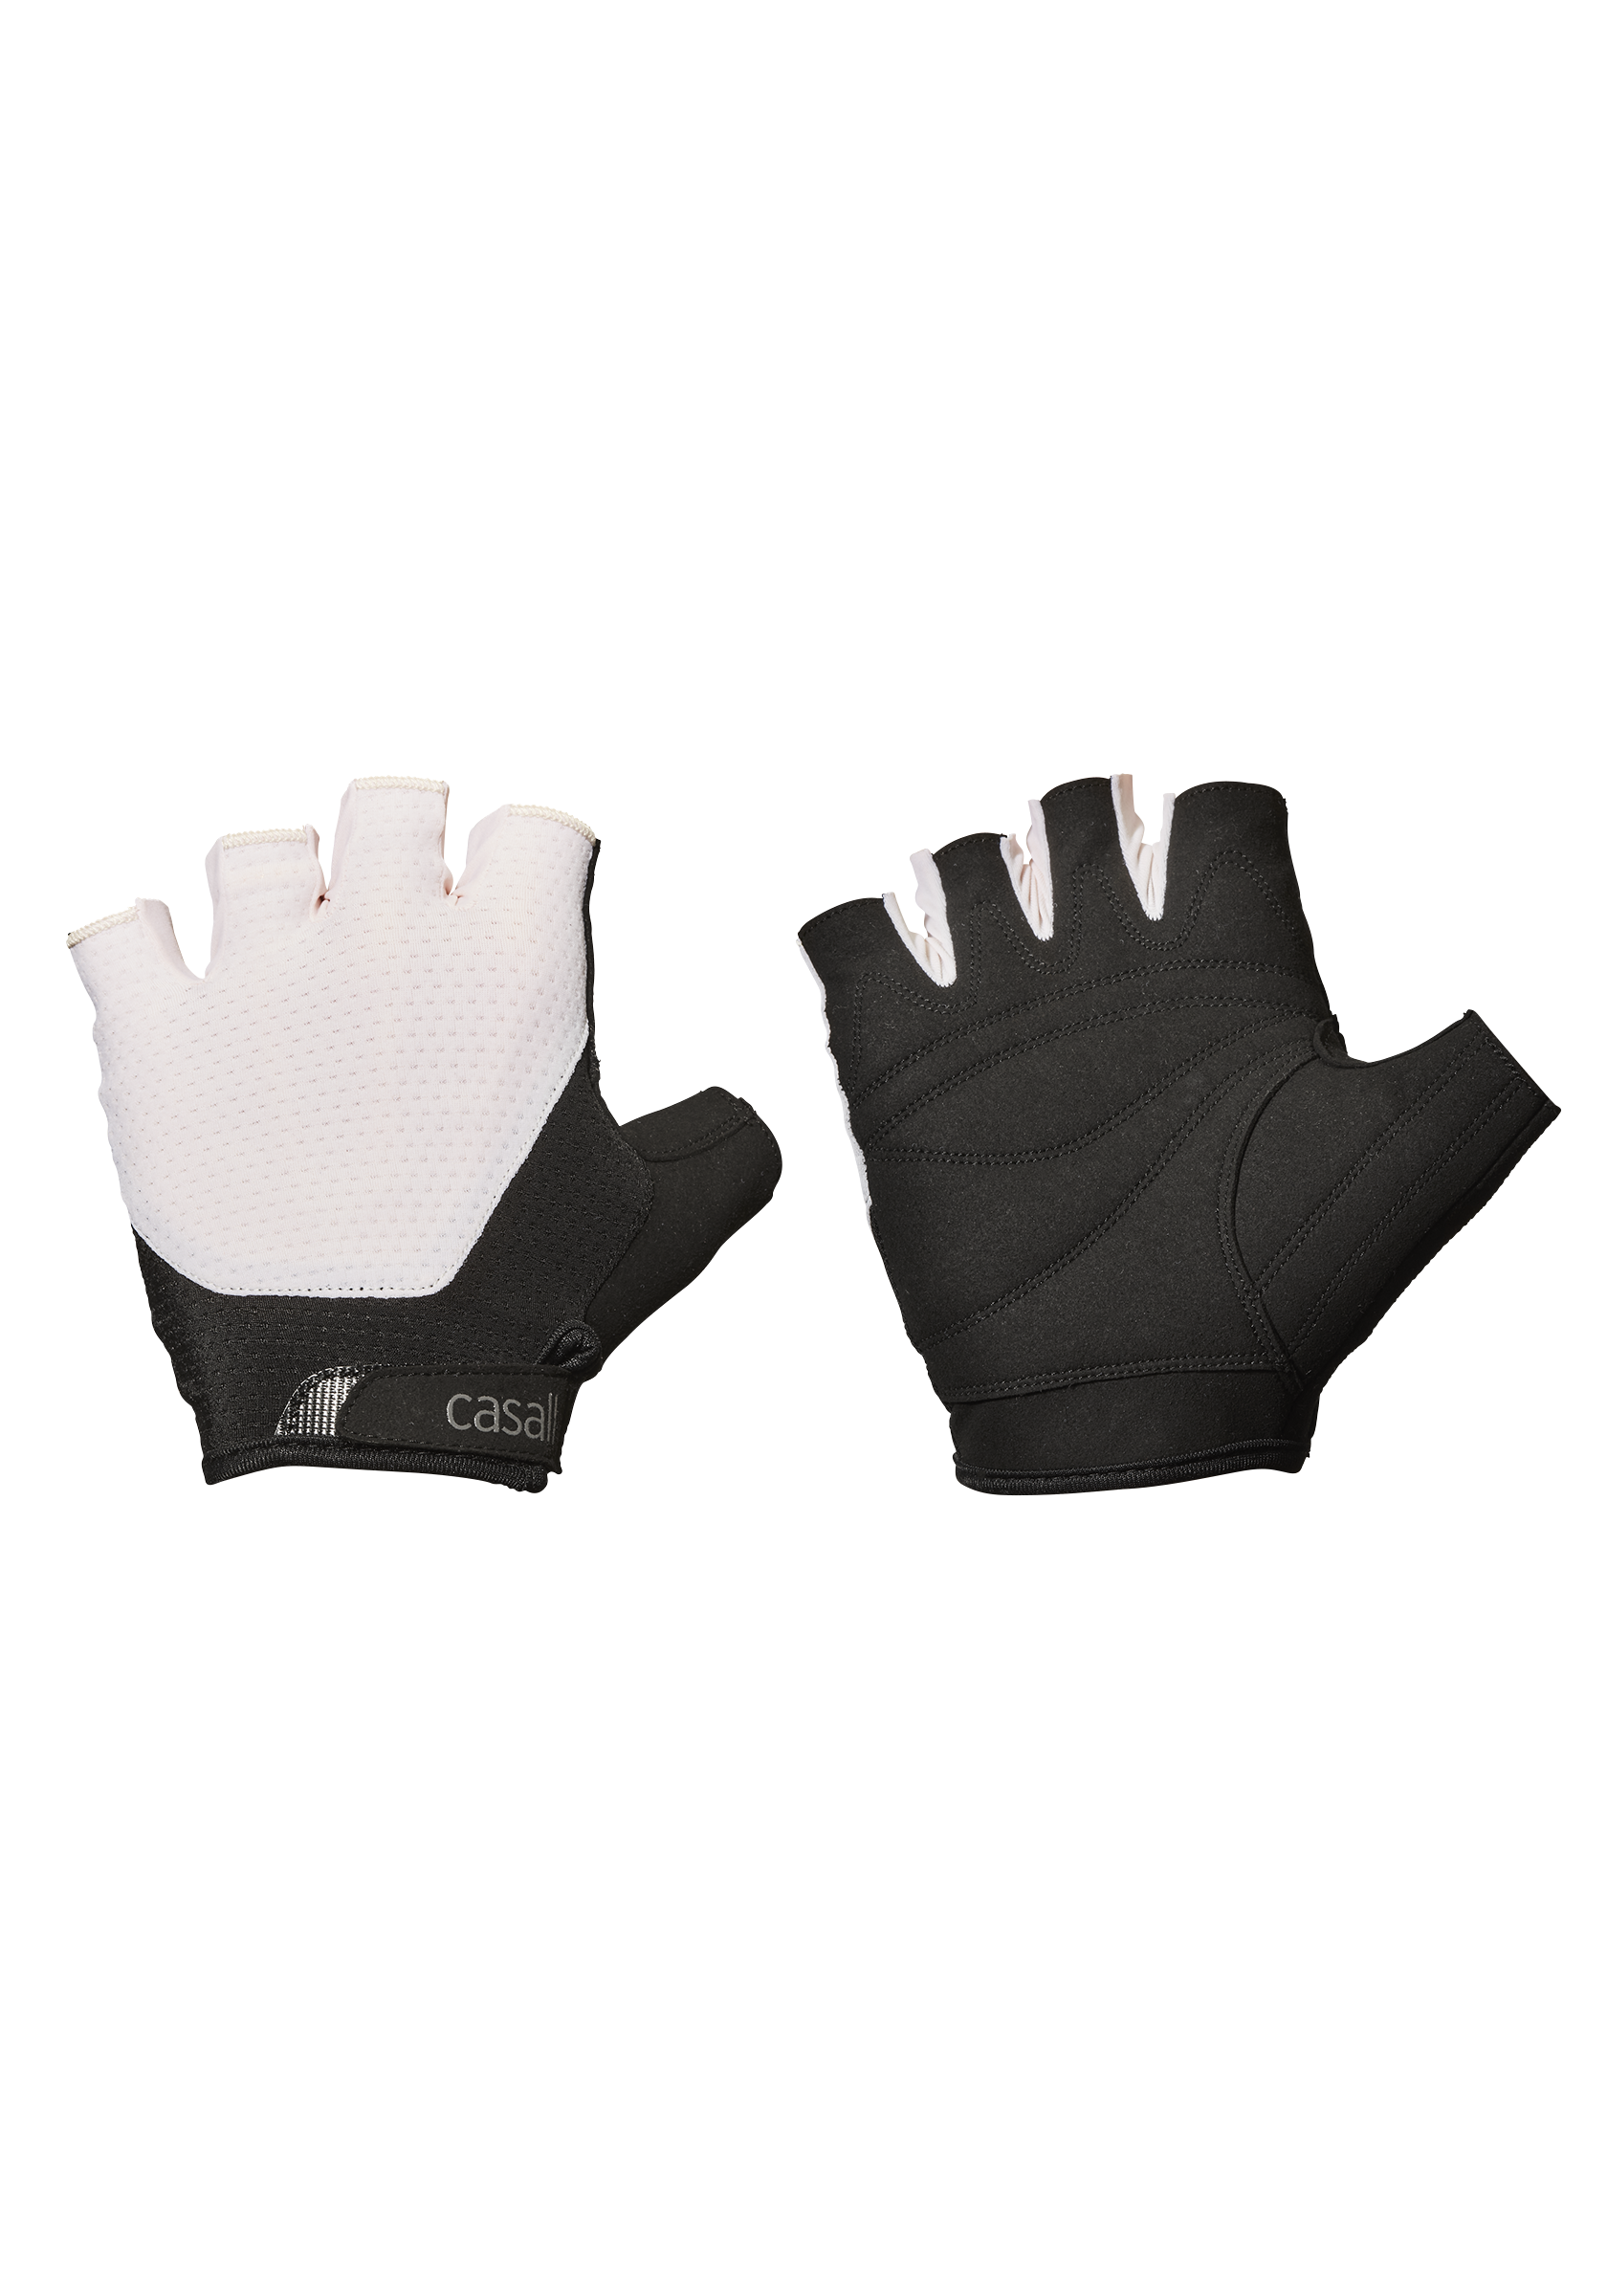 Exercise glove wmns - Pink/black